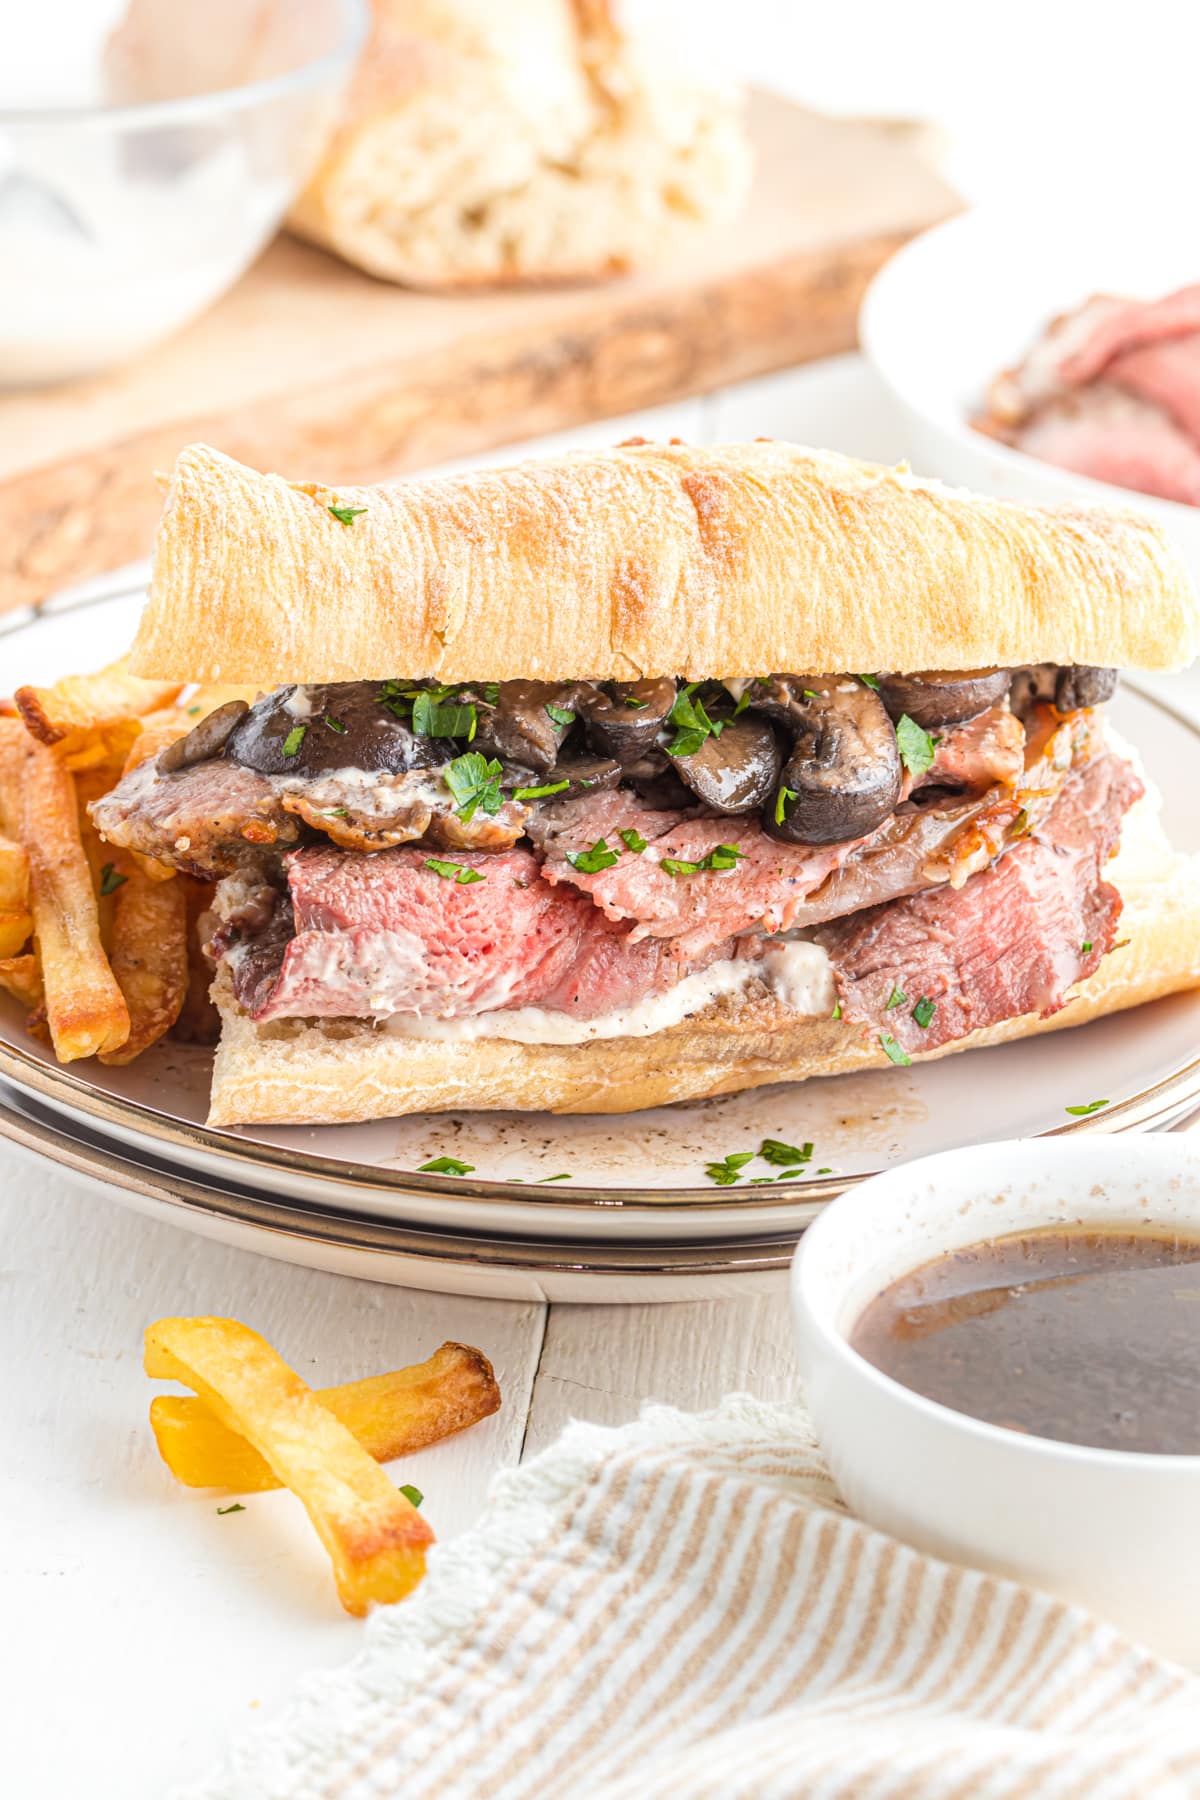 Prime rib sandwich on a plate with fries and  au jus on the side.